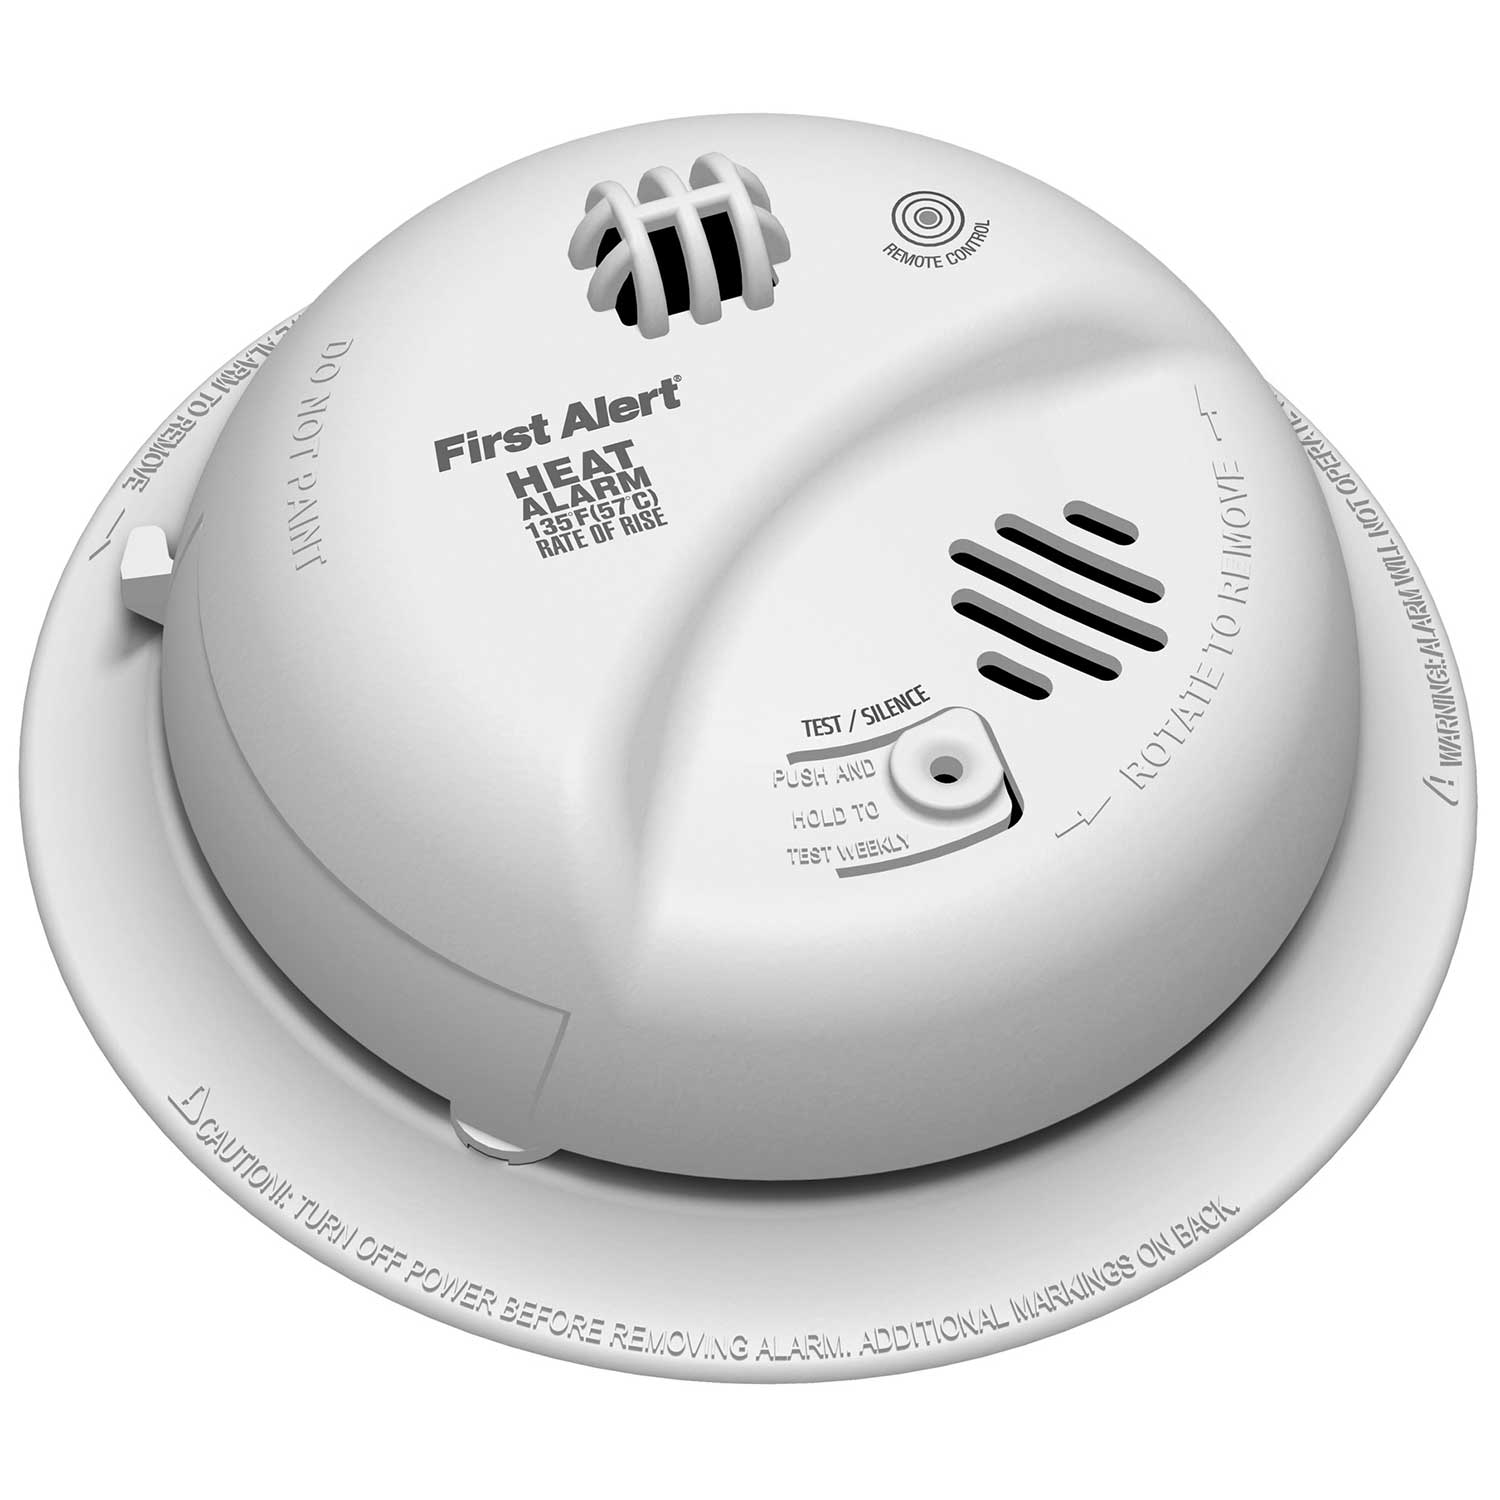 First Alert Hd6135fb Brk Brands Hardwired Heat Alarm With Battery Backup First Alert Store